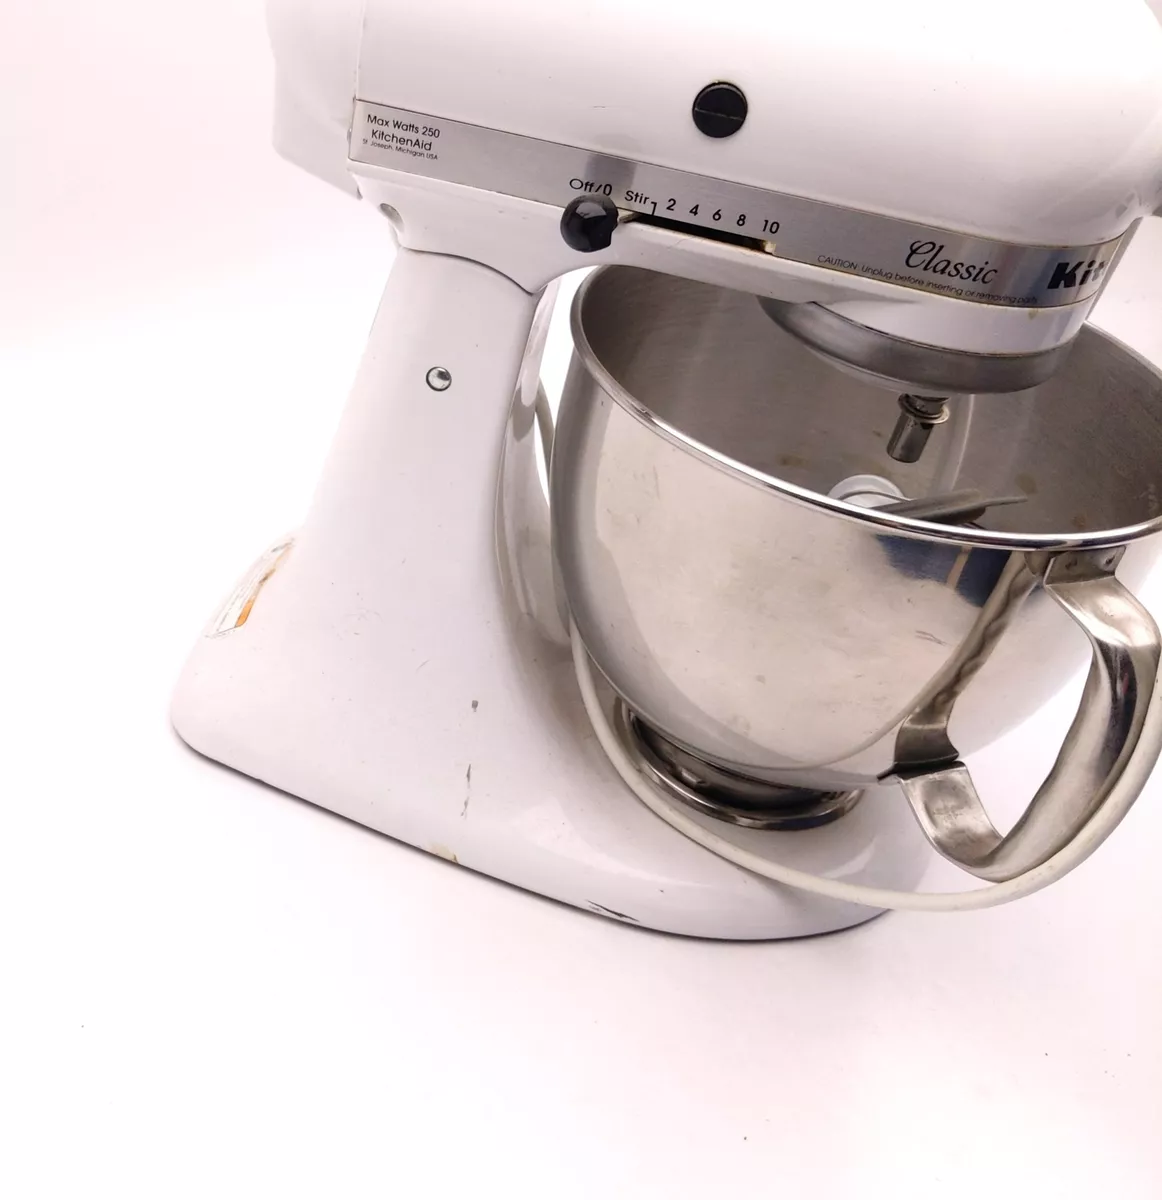 Kitchenaid Classic White For Parts Repair Turns On Bushings Need Replacement